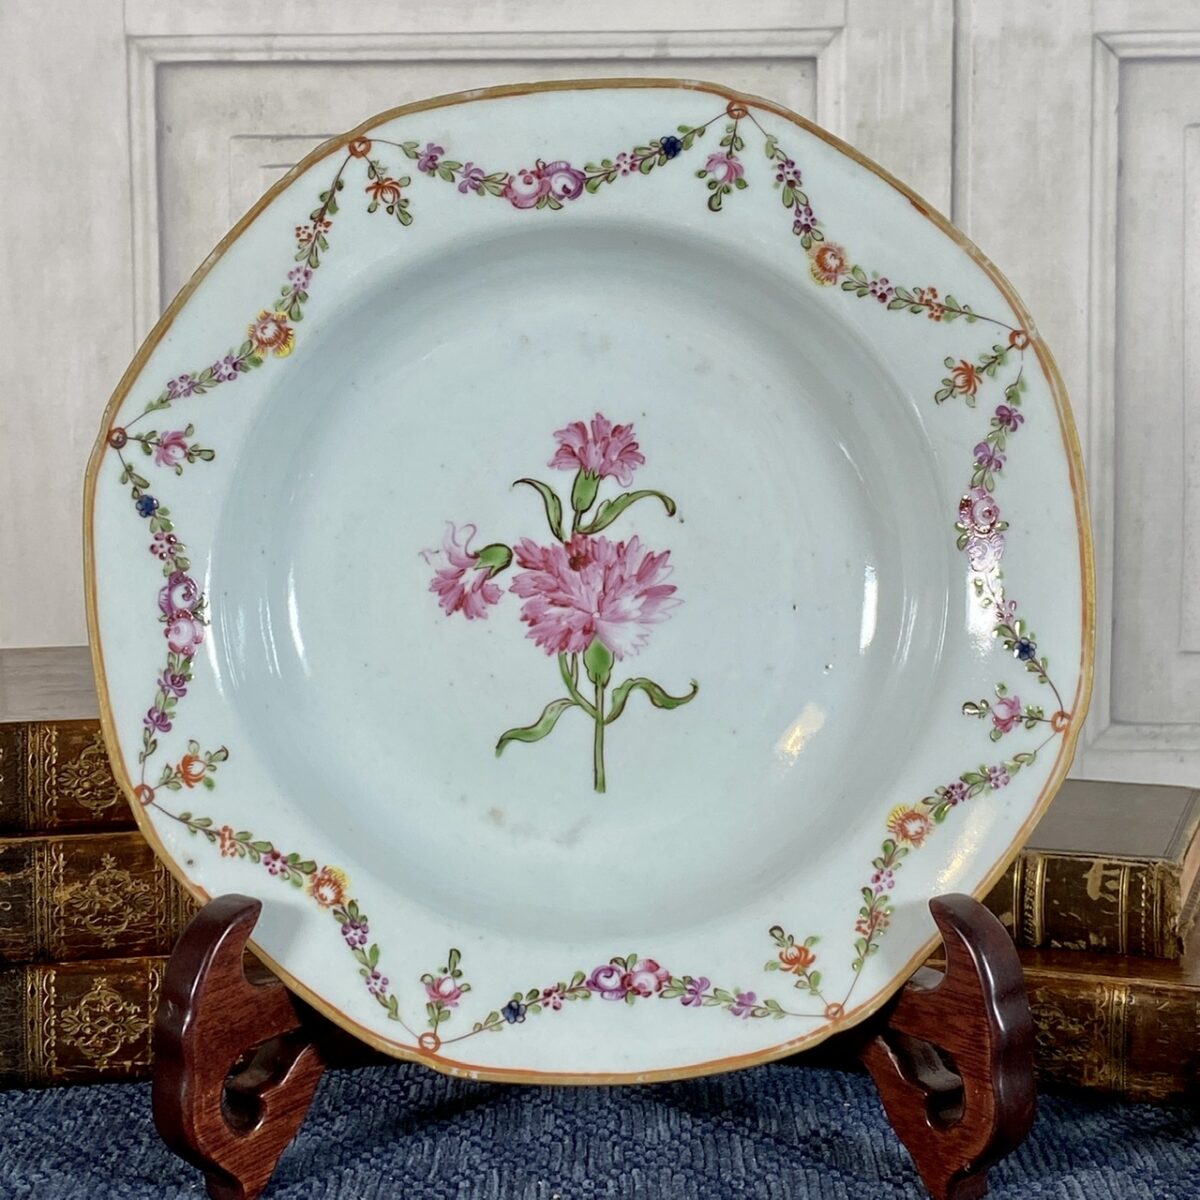 Chinese Export Porcelain Plate with Carnations. (c)